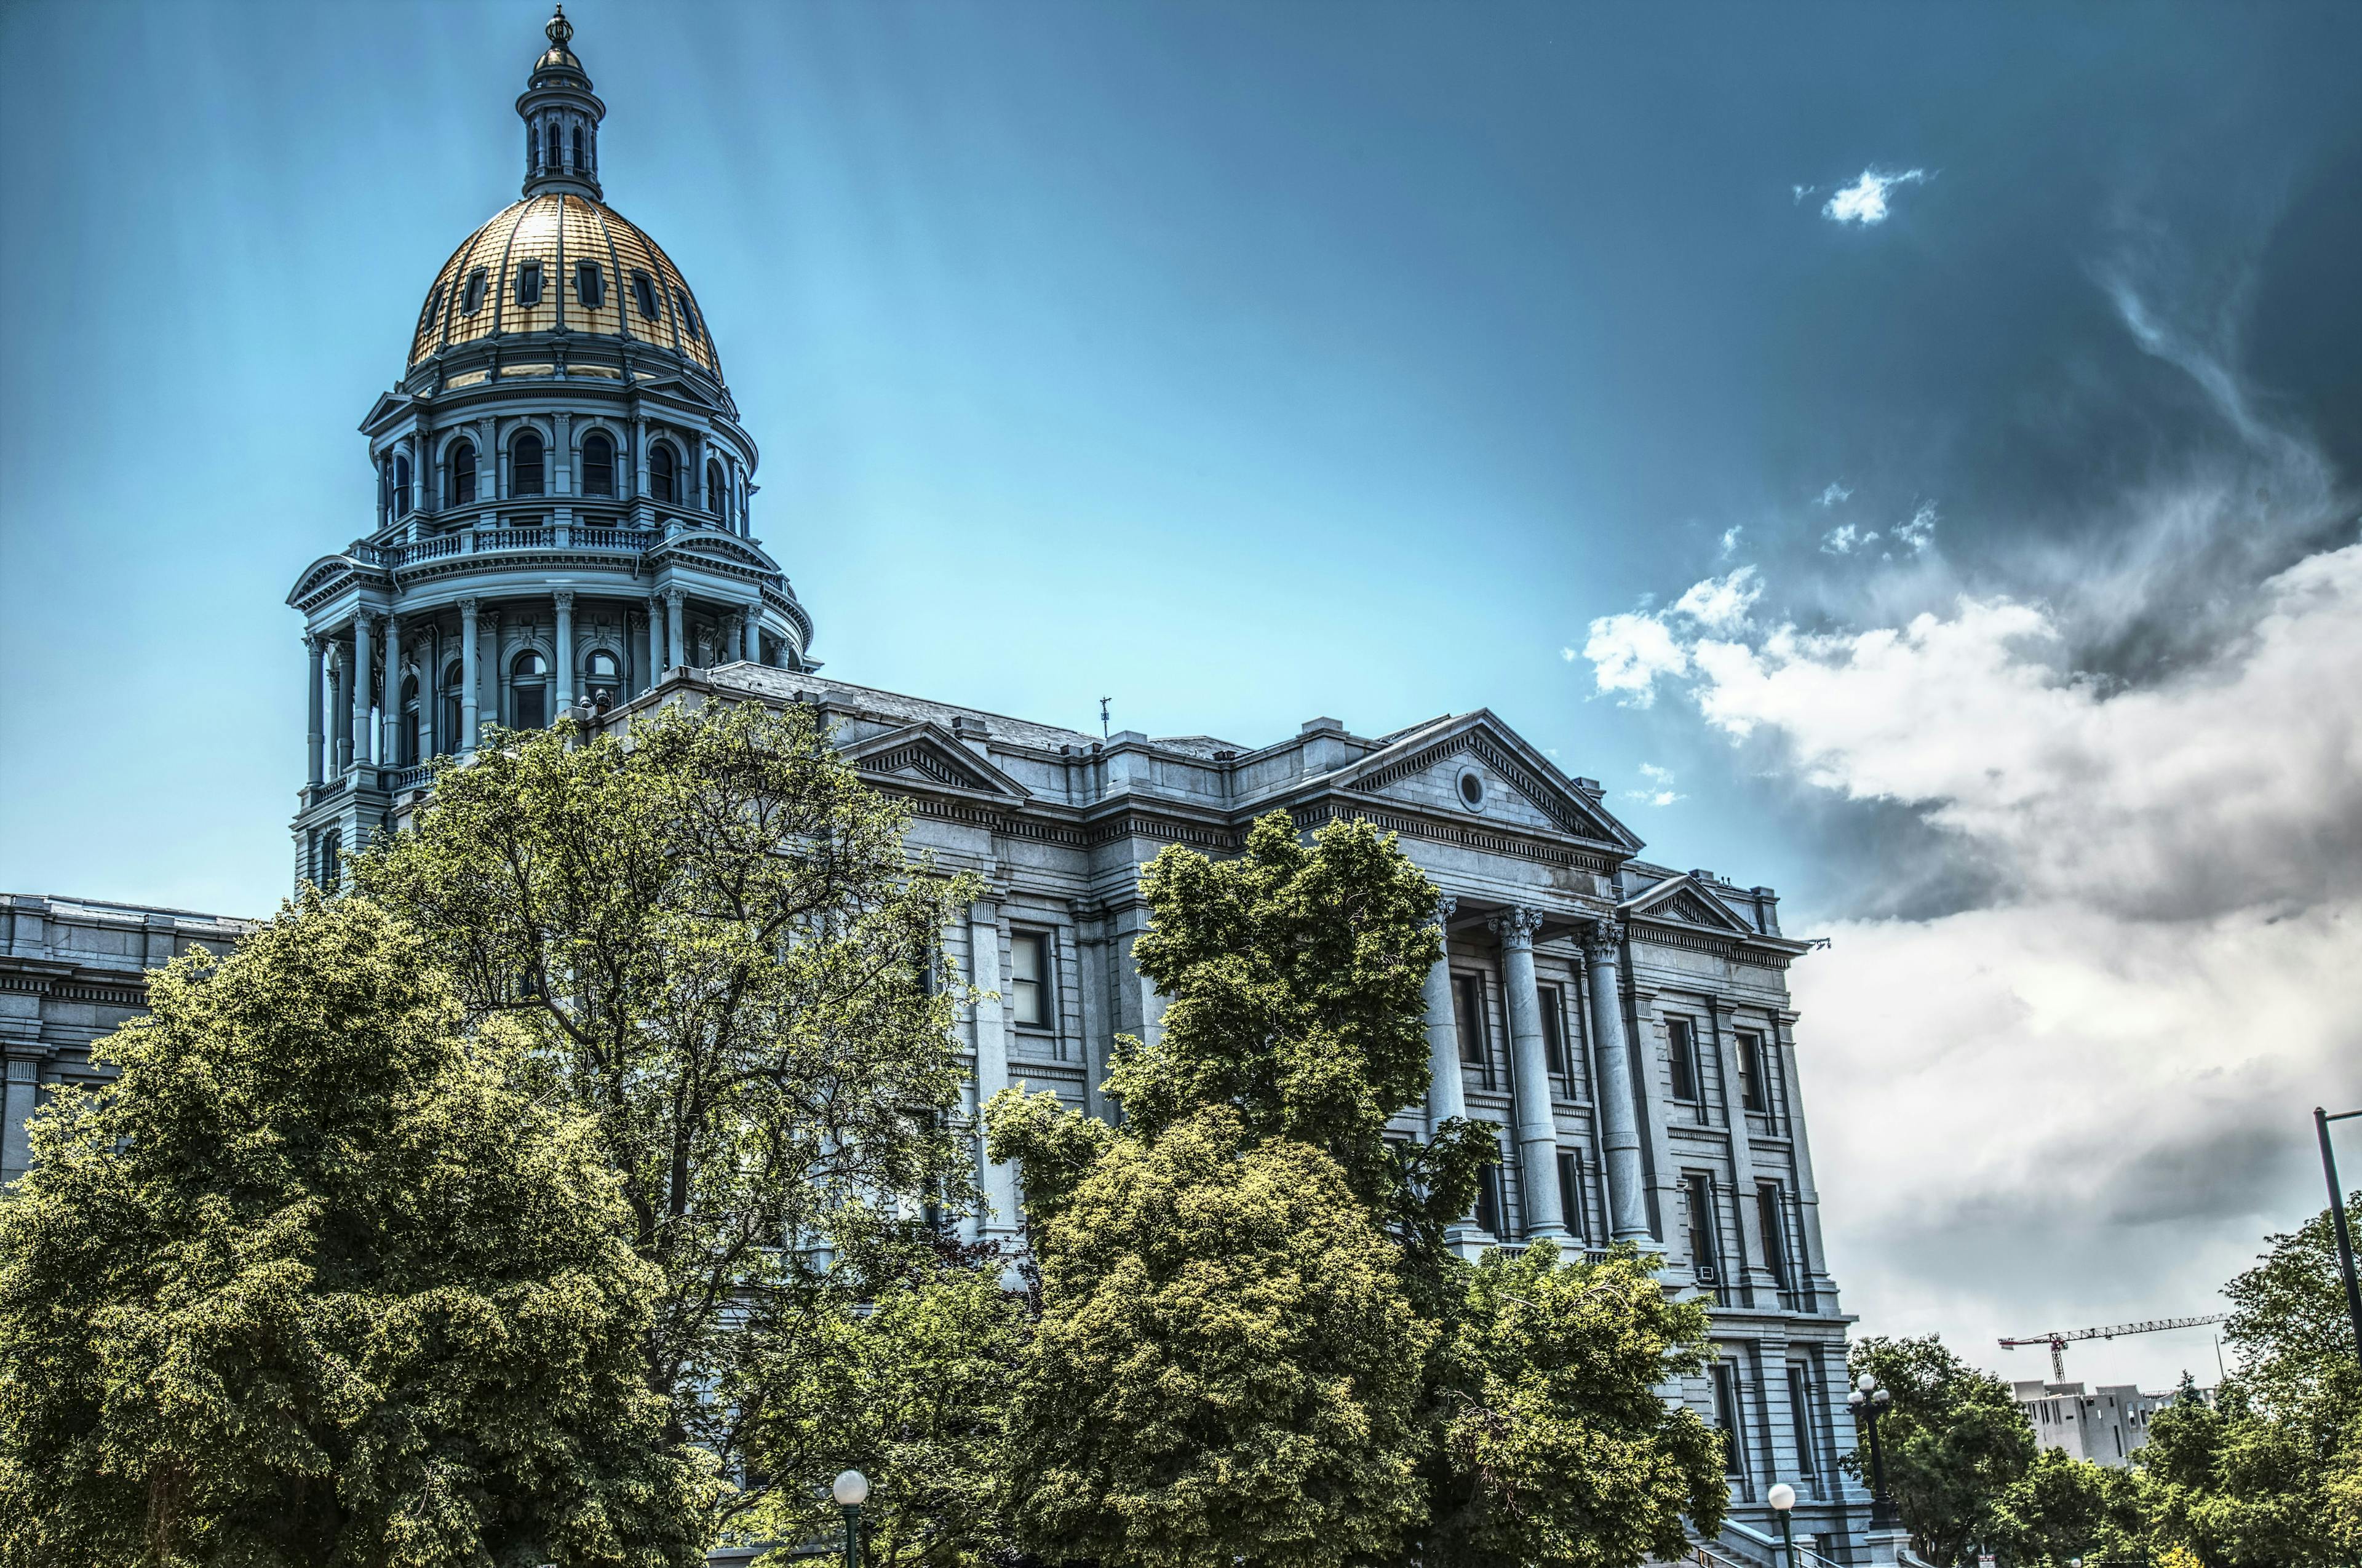 The Denver capitol building from a side angle on a sunny day.